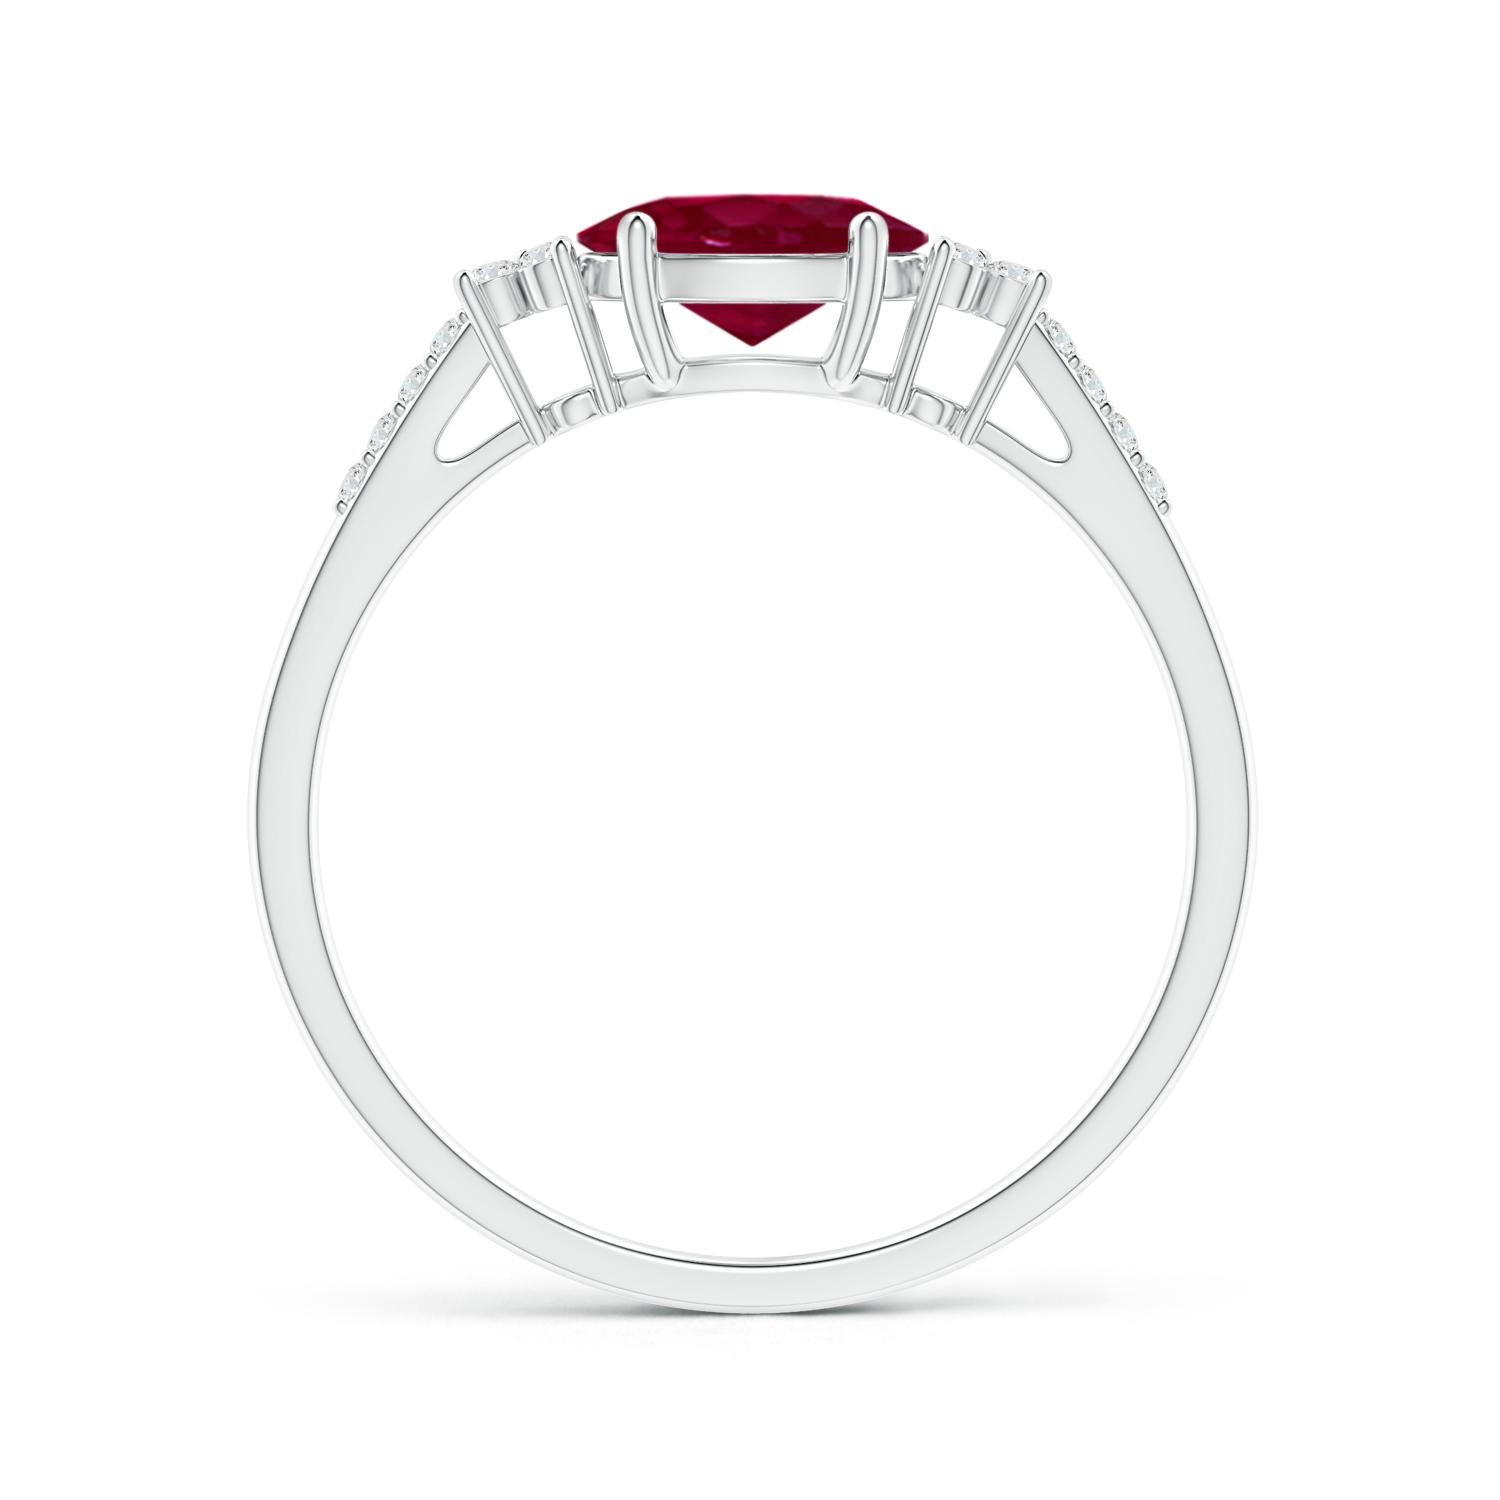 Horizontally secured at the center of this gorgeous solitaire ring is an oval ruby. Trios of shimmering diamonds flank the brilliant center stone, and additional diamond accents adorn the shoulders. The ruby and the diamonds in this platinum east